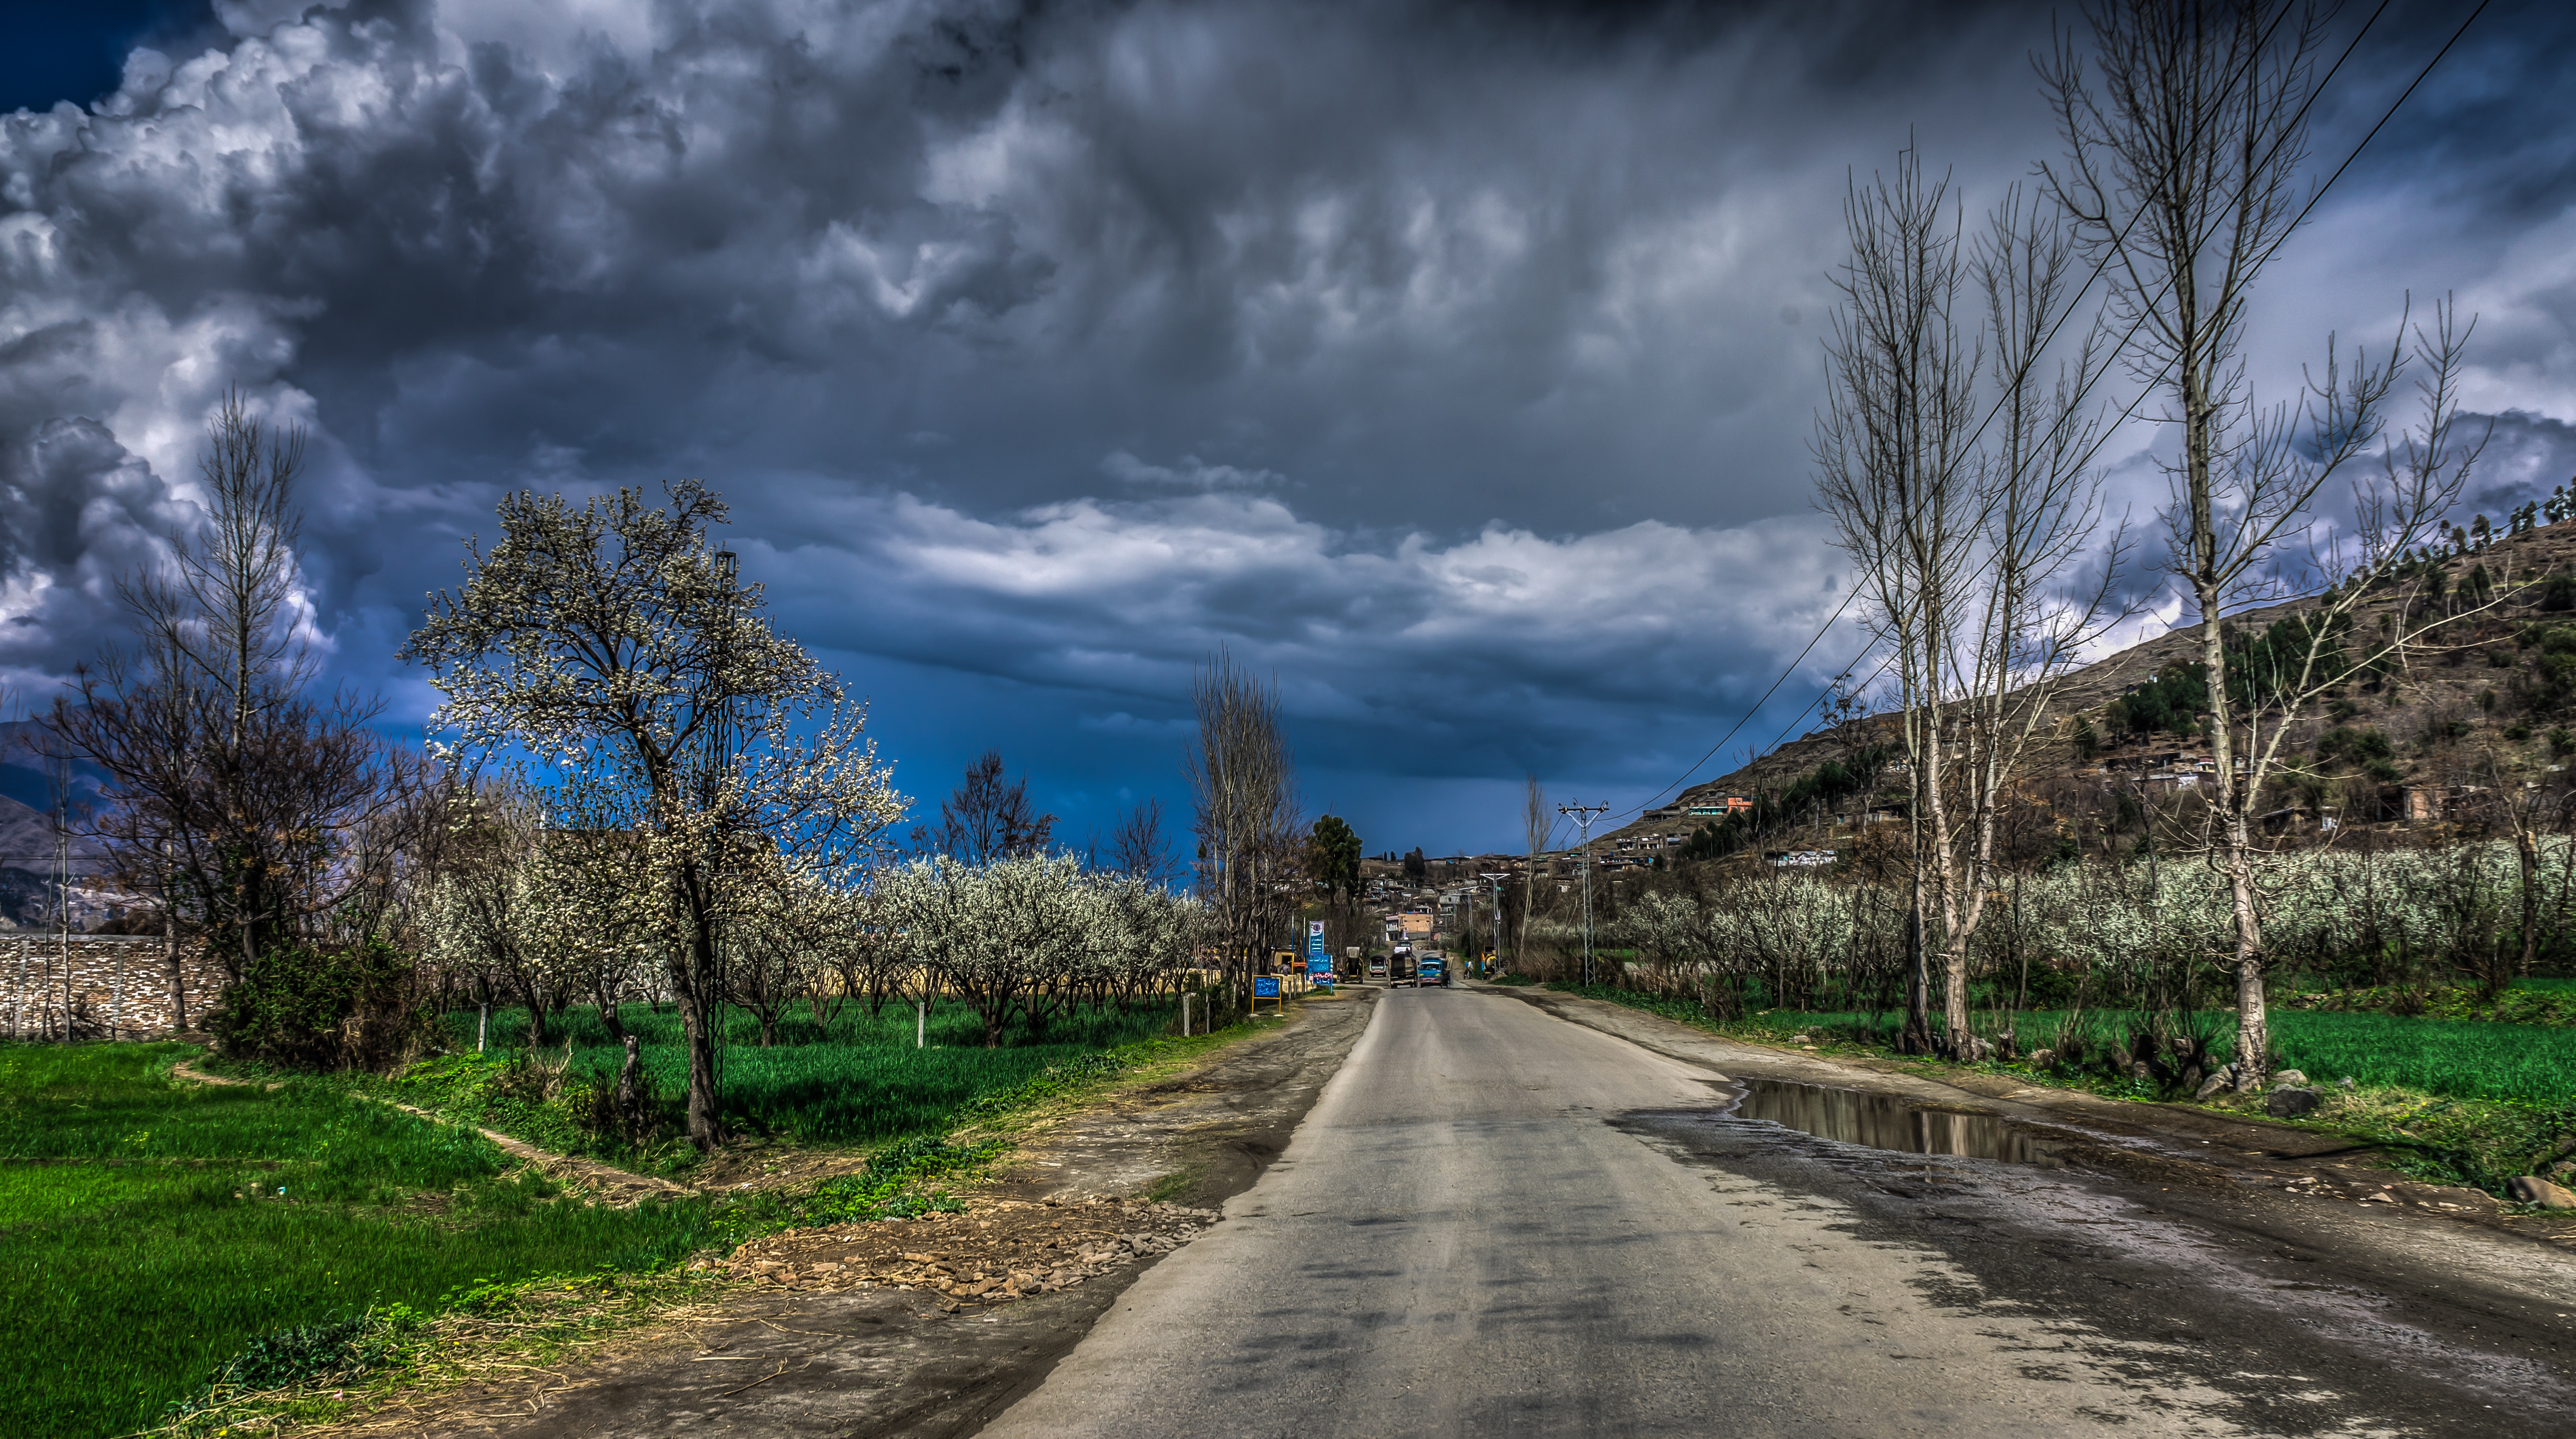 Empty concrete road surrounded by trees and grass under blue sky with heavy clouds photo